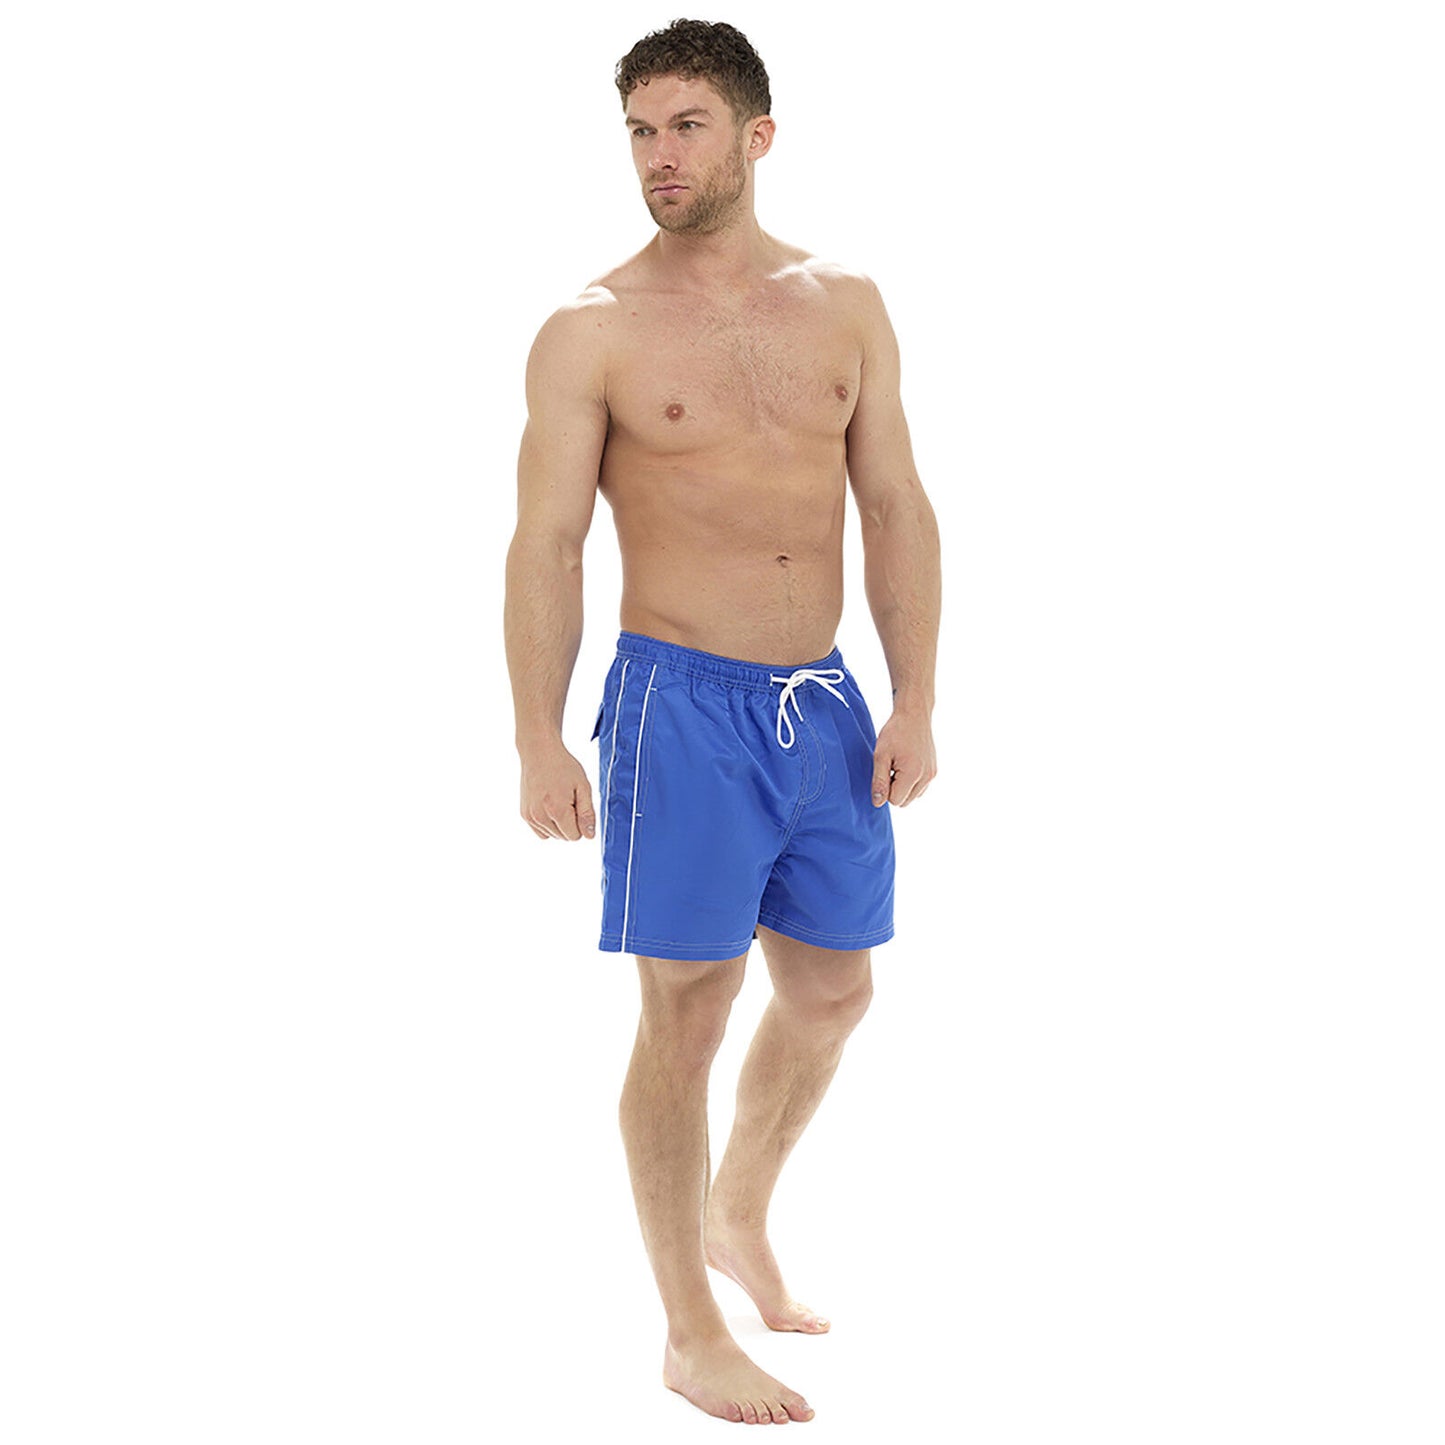 MENS MESH LINED QUICK DRY SHORTS SWIMMING GYM RUNNING SUMMER BEACH SPORTS TRUNKS